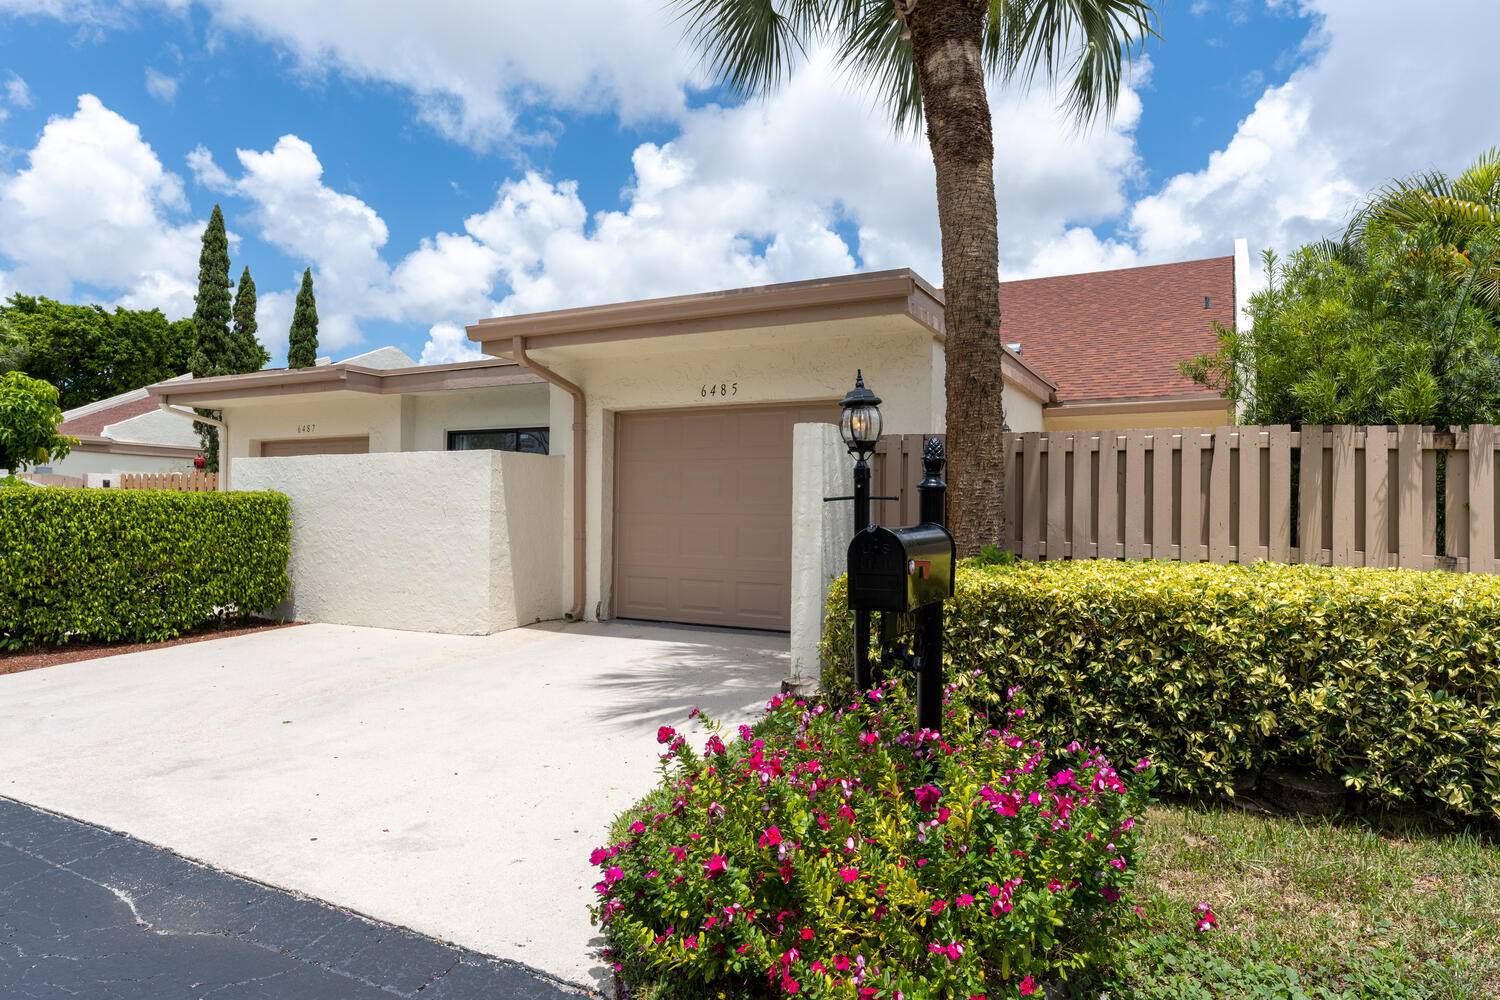 Spectacular private 3 bedroom villa located in the heart of Boca Raton.